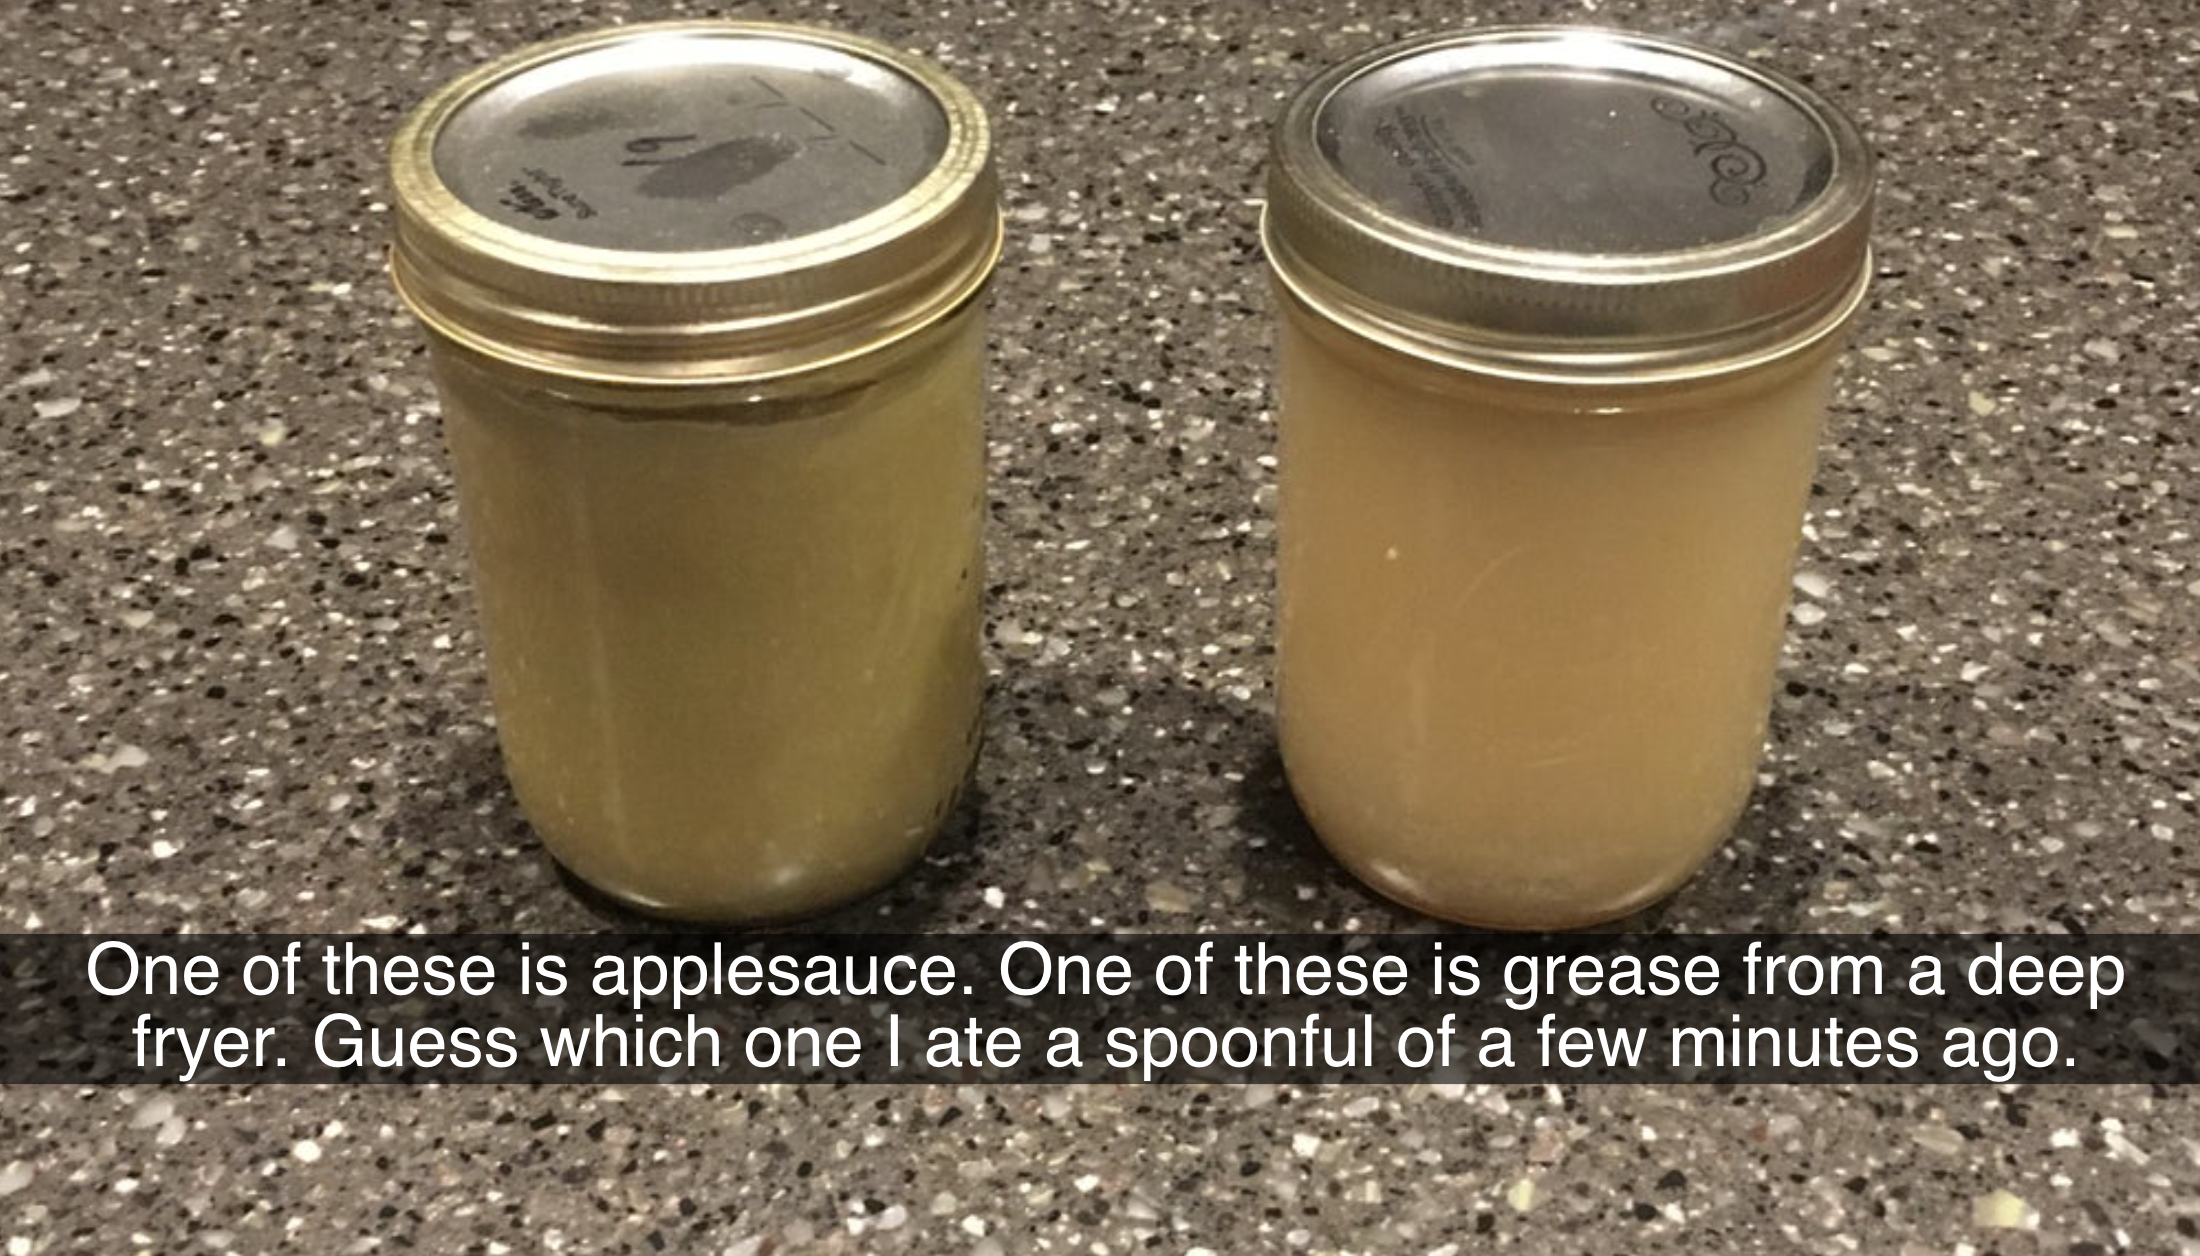 two similar looking jars one full of grease and the other applesauce and the person accidentally ate the applesauce